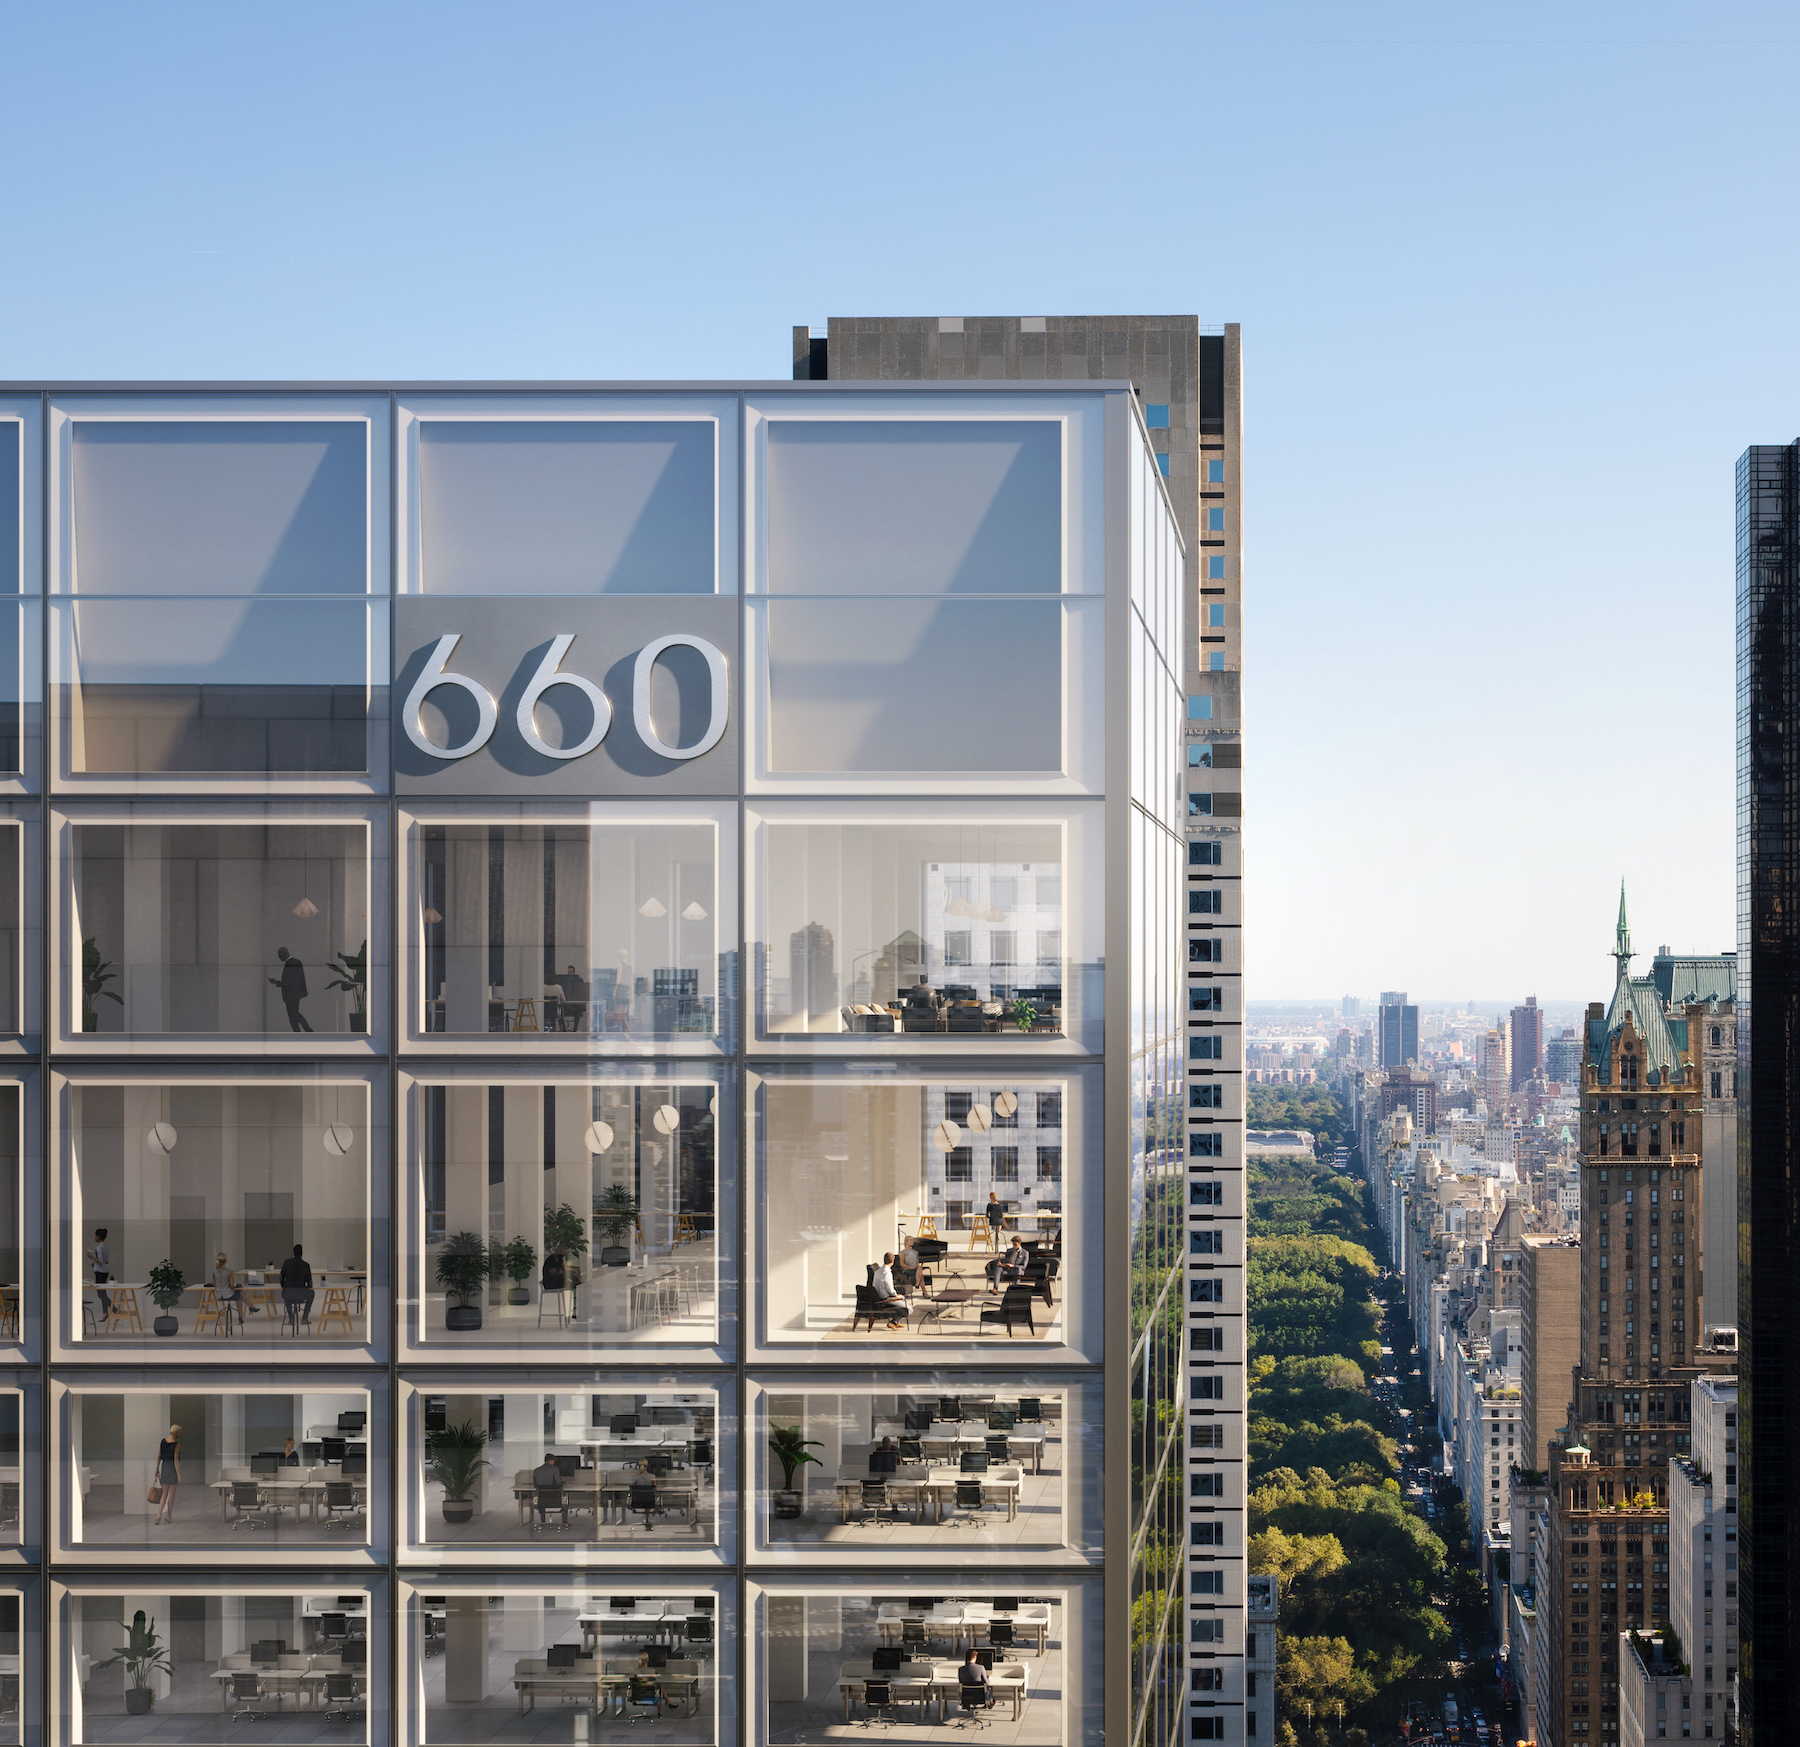 KPF’s redesign of 660 Fifth Avenue in New York City